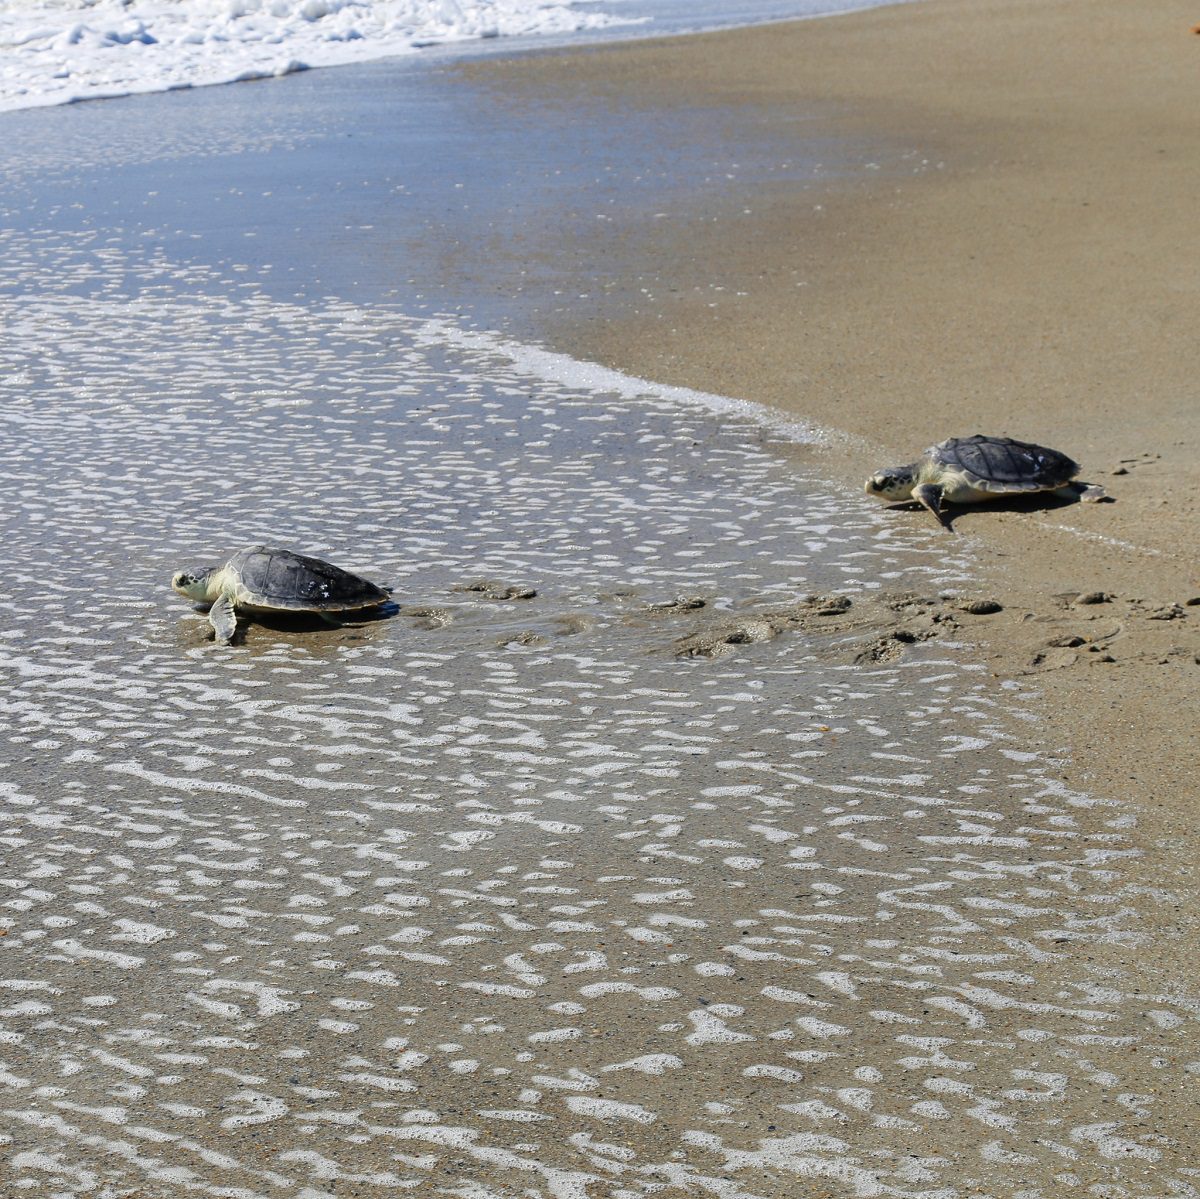 "Shellabrate" turtles, like these Kemp Ridleys, Tuesday as part of World Turtle Day. Photo: NC Aquariums